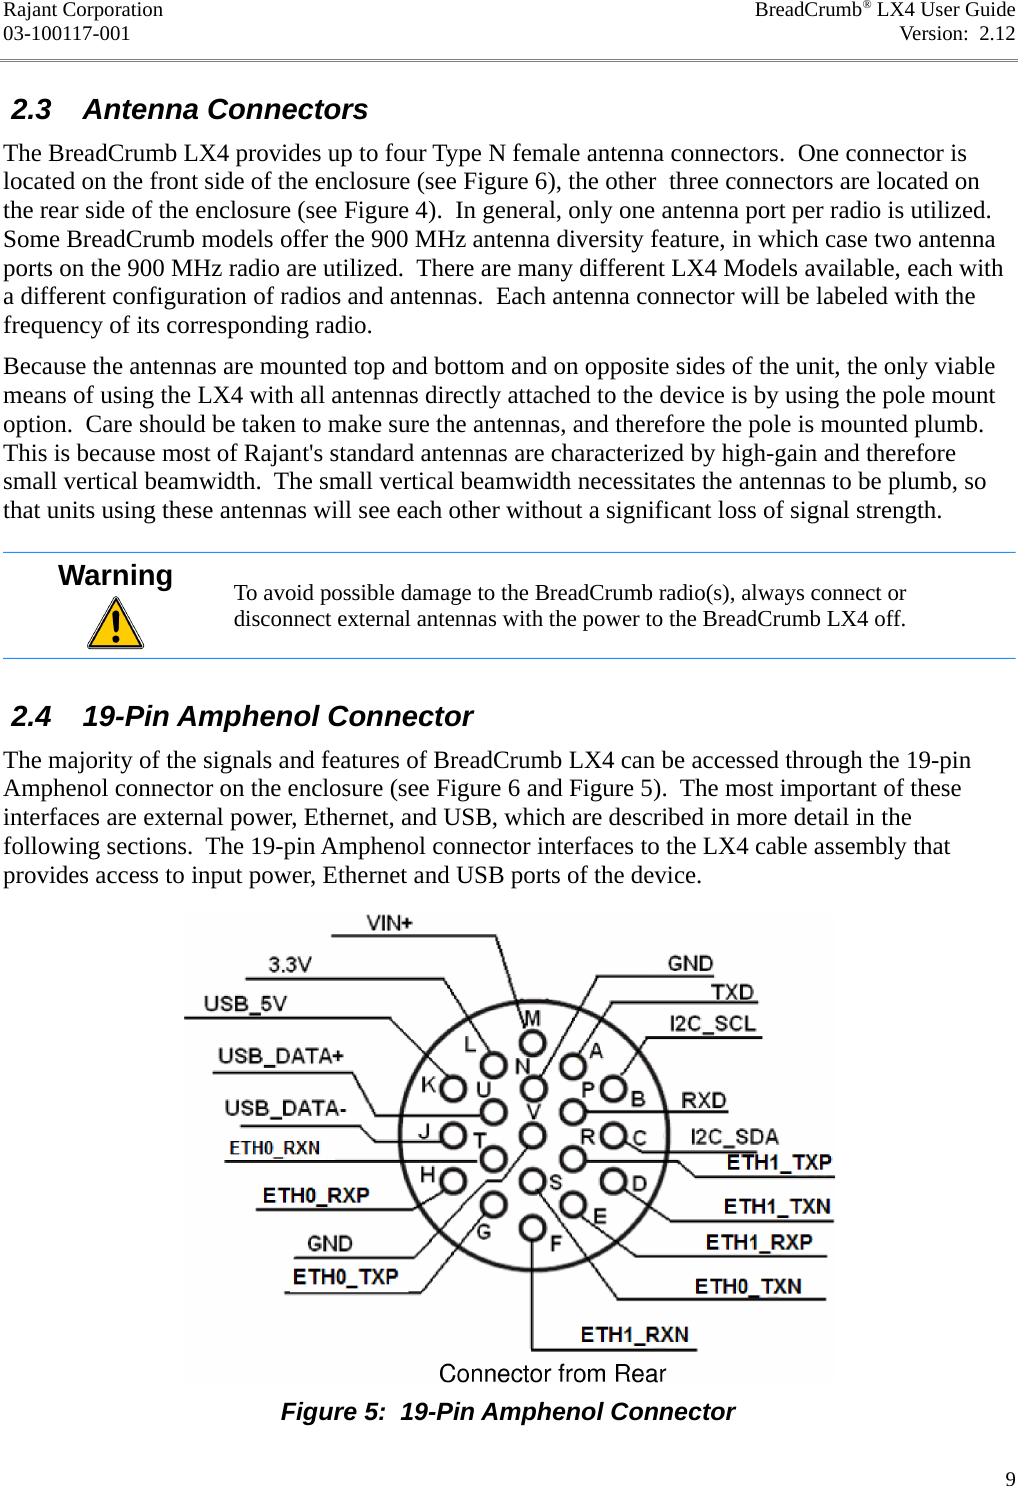 Rajant Corporation BreadCrumb® LX4 User Guide03-100117-001 Version:  2.12 2.3  Antenna ConnectorsThe BreadCrumb LX4 provides up to four Type N female antenna connectors.  One connector is located on the front side of the enclosure (see Figure 6), the other  three connectors are located on the rear side of the enclosure (see Figure 4).  In general, only one antenna port per radio is utilized. Some BreadCrumb models offer the 900 MHz antenna diversity feature, in which case two antenna ports on the 900 MHz radio are utilized.  There are many different LX4 Models available, each with a different configuration of radios and antennas.  Each antenna connector will be labeled with the frequency of its corresponding radio.Because the antennas are mounted top and bottom and on opposite sides of the unit, the only viable means of using the LX4 with all antennas directly attached to the device is by using the pole mount option.  Care should be taken to make sure the antennas, and therefore the pole is mounted plumb. This is because most of Rajant&apos;s standard antennas are characterized by high-gain and therefore small vertical beamwidth.  The small vertical beamwidth necessitates the antennas to be plumb, so that units using these antennas will see each other without a significant loss of signal strength.Warning To avoid possible damage to the BreadCrumb radio(s), always connect or disconnect external antennas with the power to the BreadCrumb LX4 off. 2.4  19-Pin Amphenol ConnectorThe majority of the signals and features of BreadCrumb LX4 can be accessed through the 19-pin Amphenol connector on the enclosure (see Figure 6 and Figure 5).  The most important of these interfaces are external power, Ethernet, and USB, which are described in more detail in the following sections.  The 19-pin Amphenol connector interfaces to the LX4 cable assembly that provides access to input power, Ethernet and USB ports of the device.9Figure 5:  19-Pin Amphenol Connector